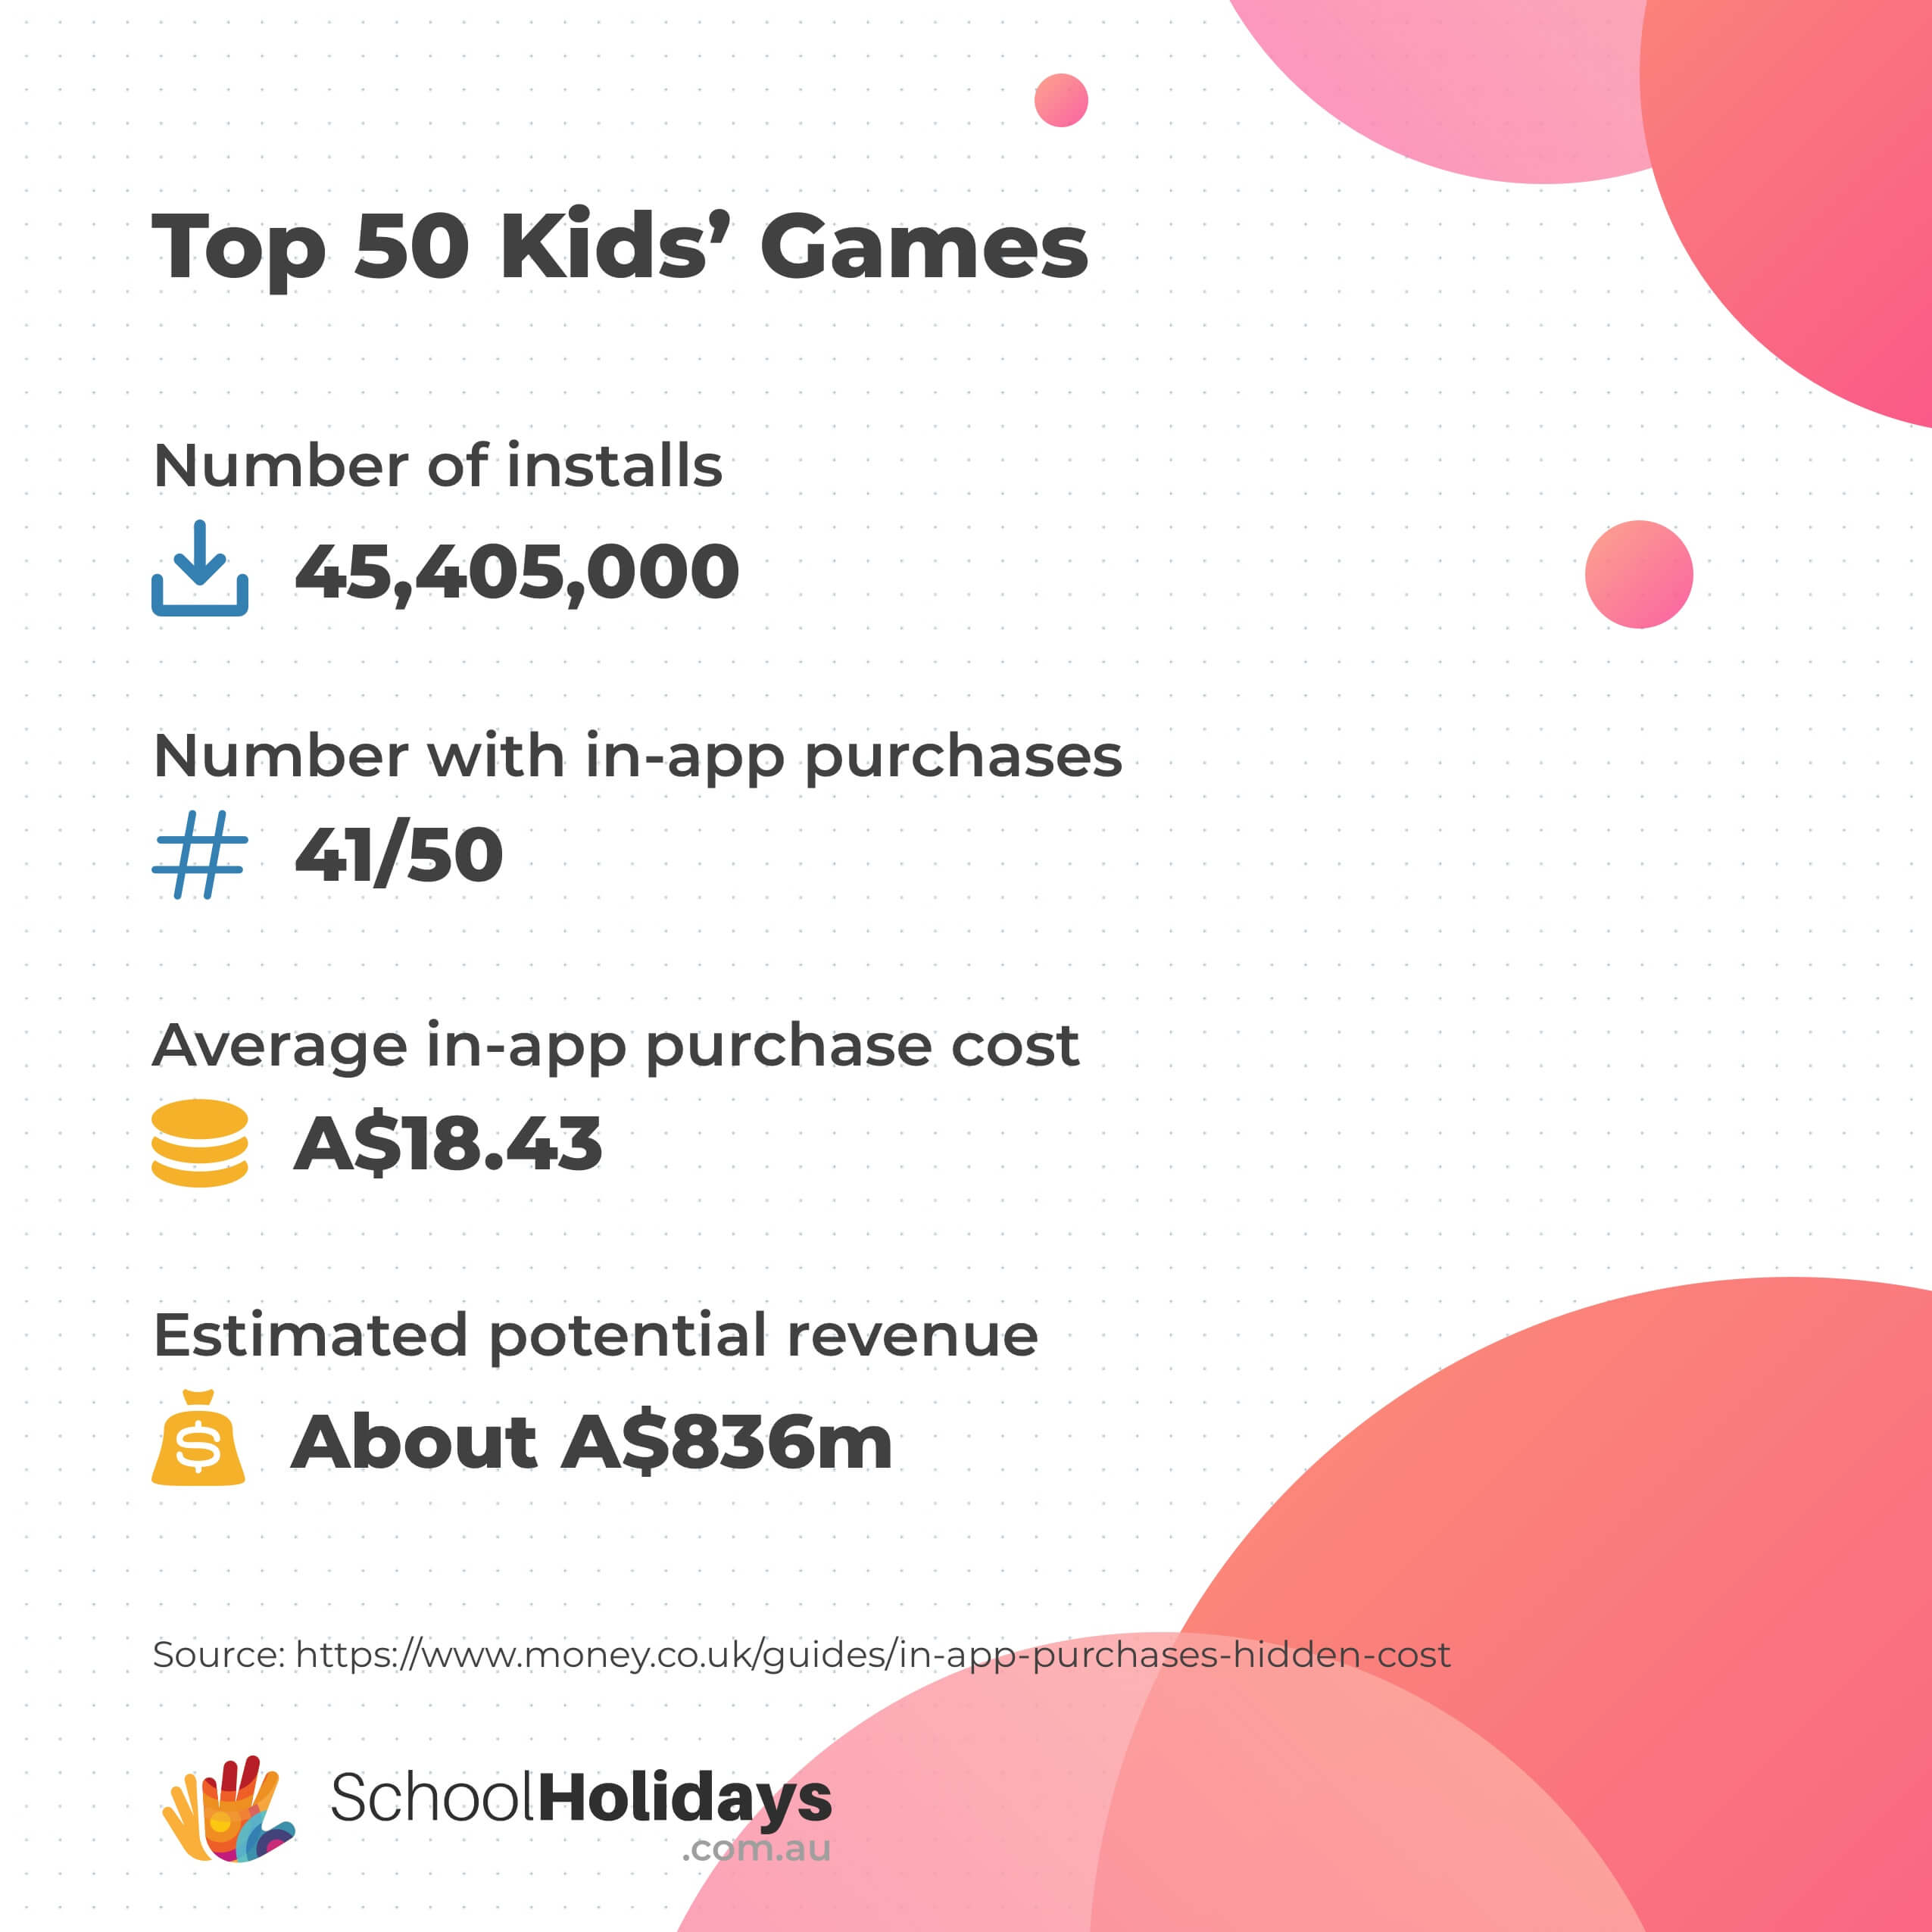 Google Play store's Top Free Kids' Games stats by Money.co.uk converted into Australian Dollars as of 21 May 2020.